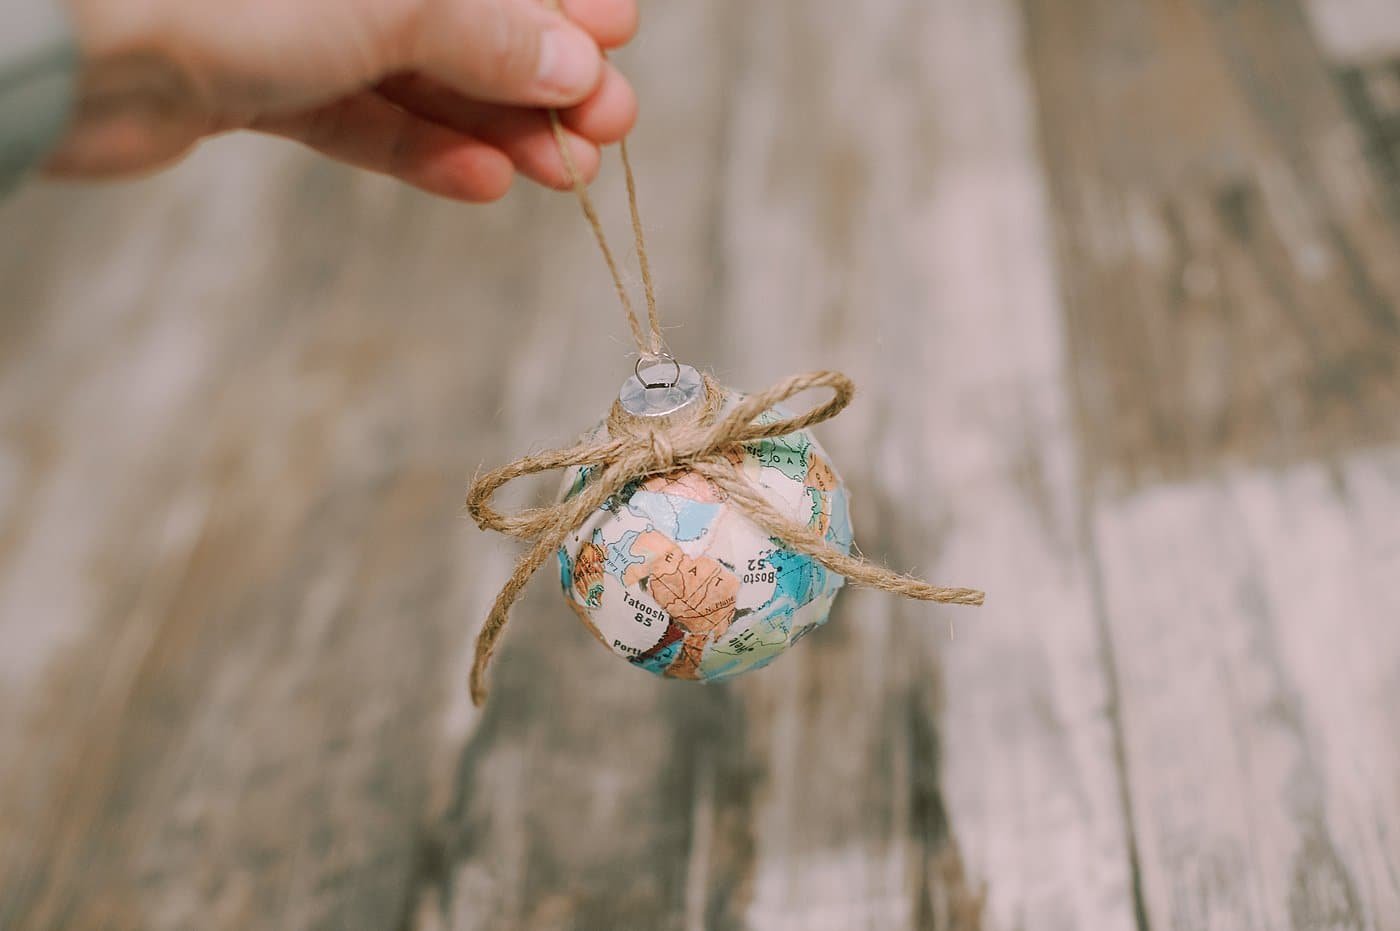 add a piece of twine around the neck of the ornament ball and tie a bow for decoration